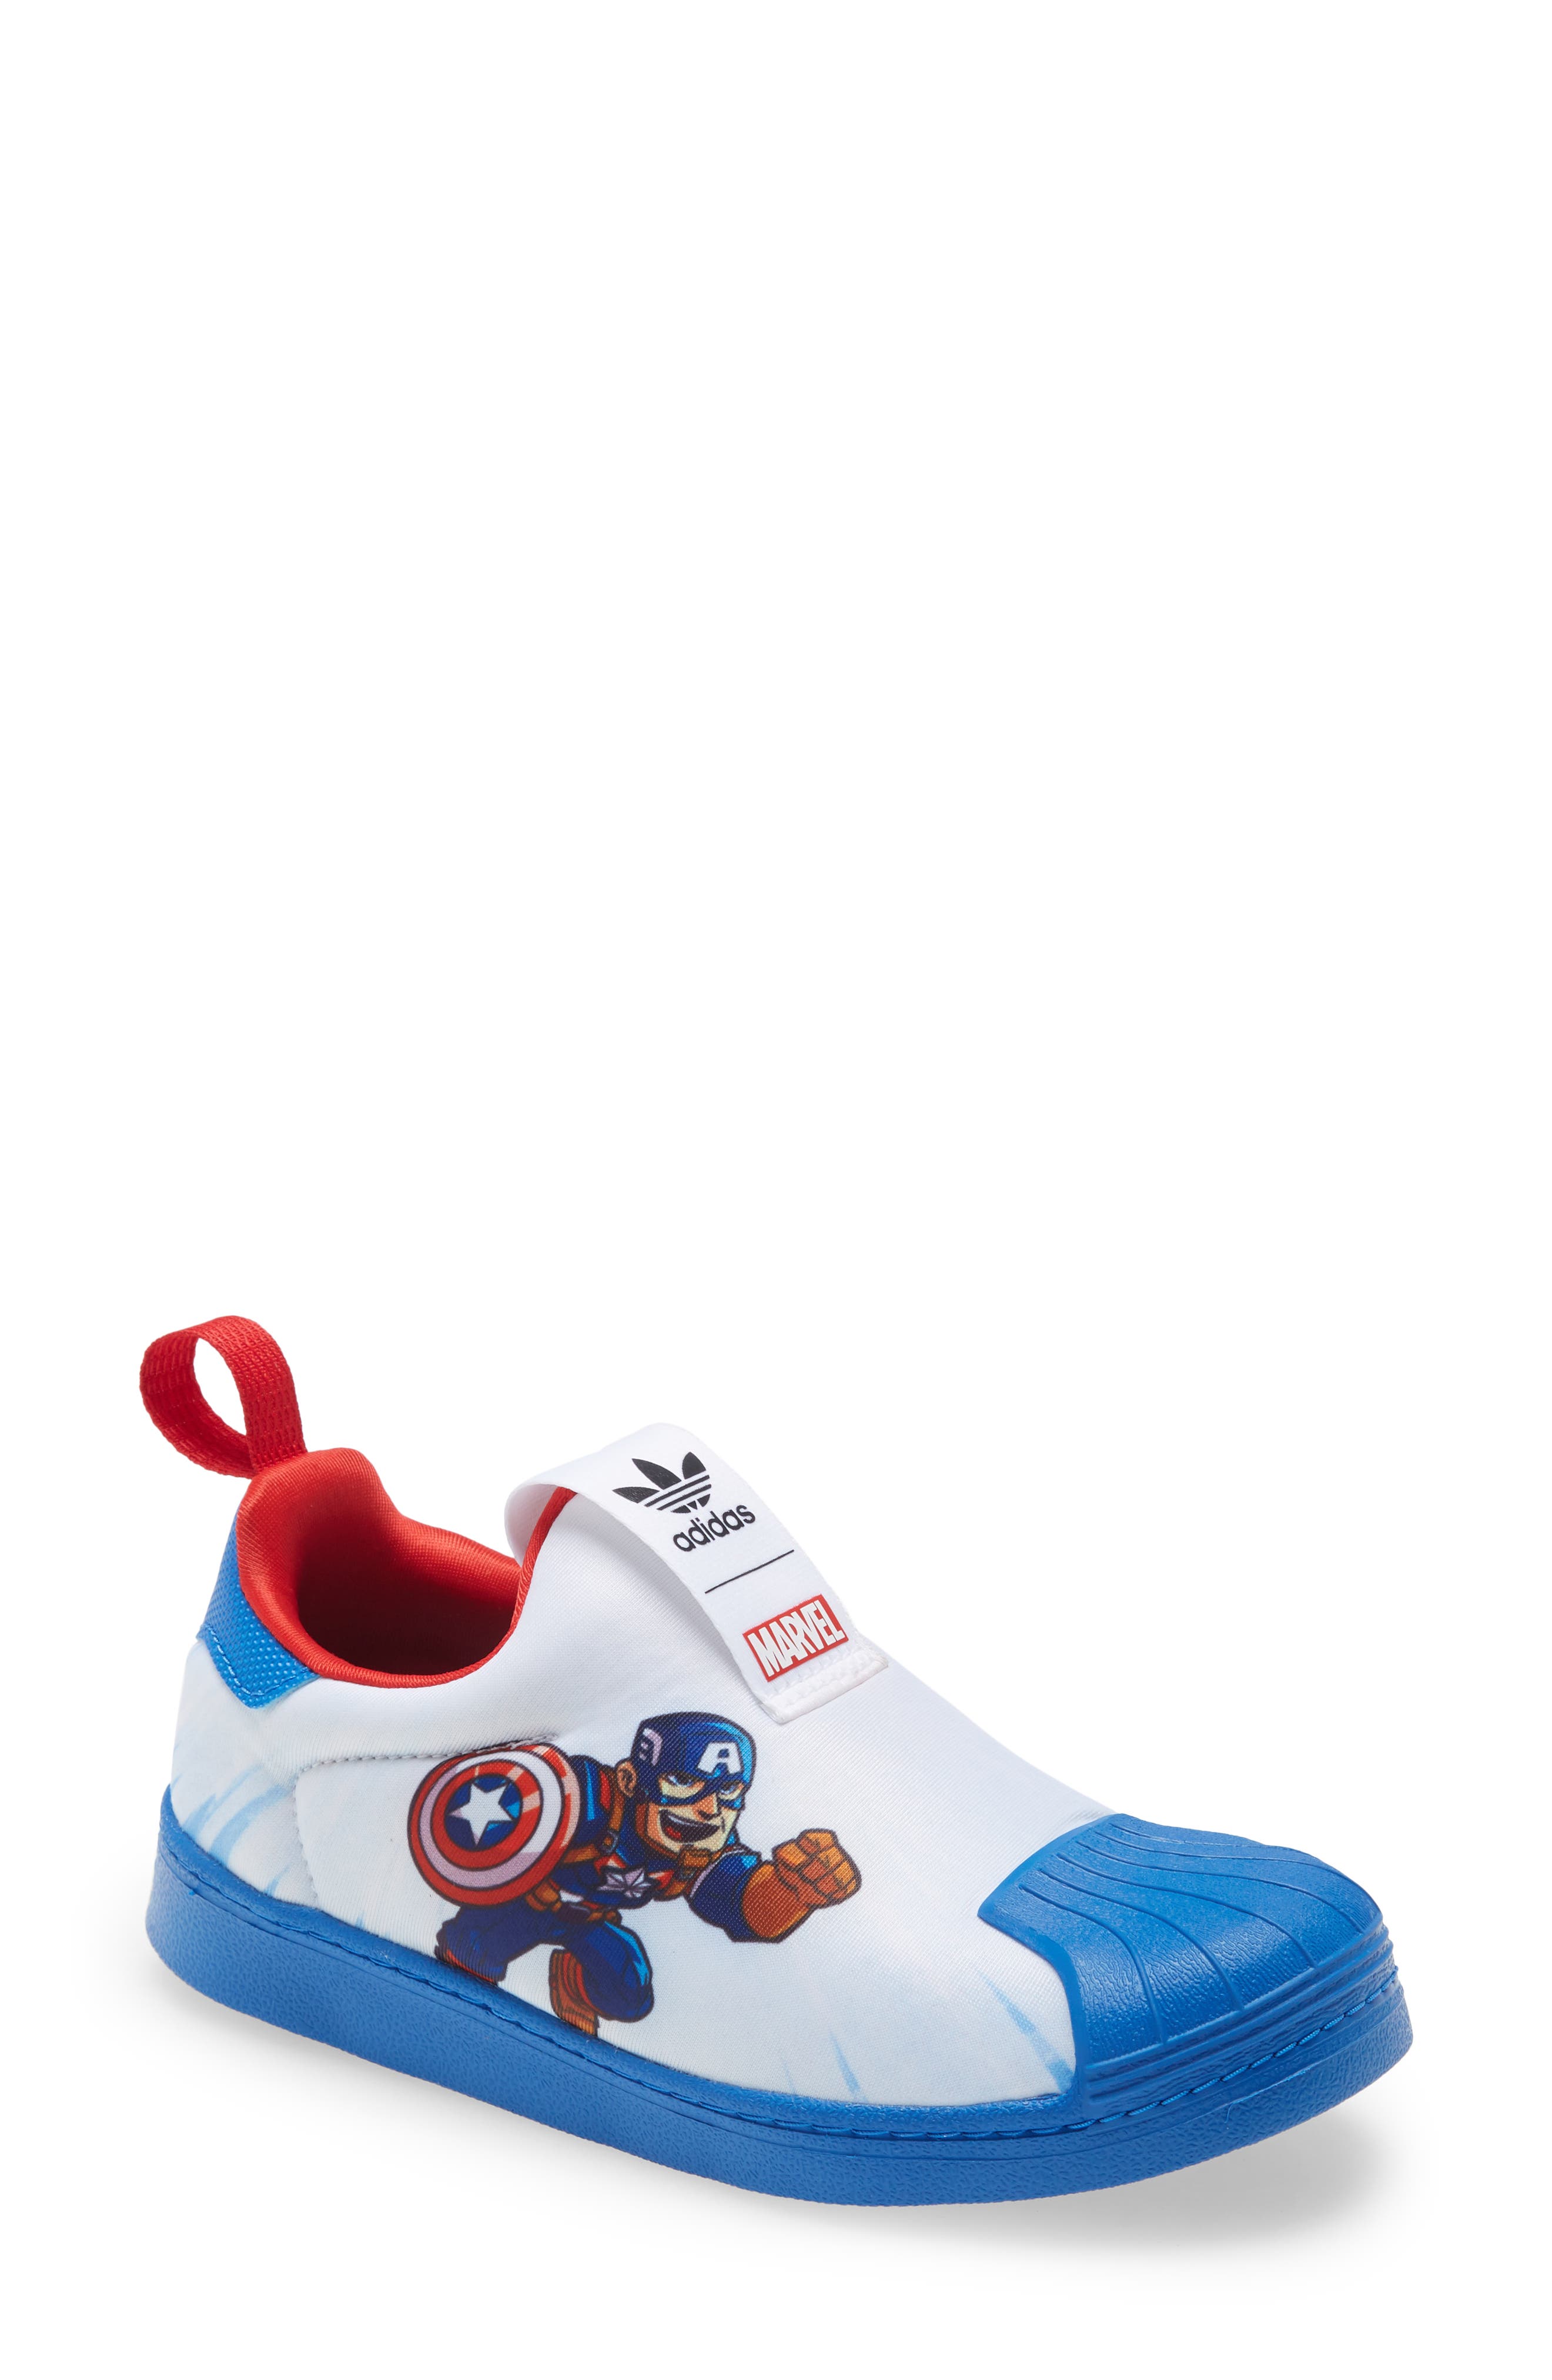 captain marvel adidas sneakers